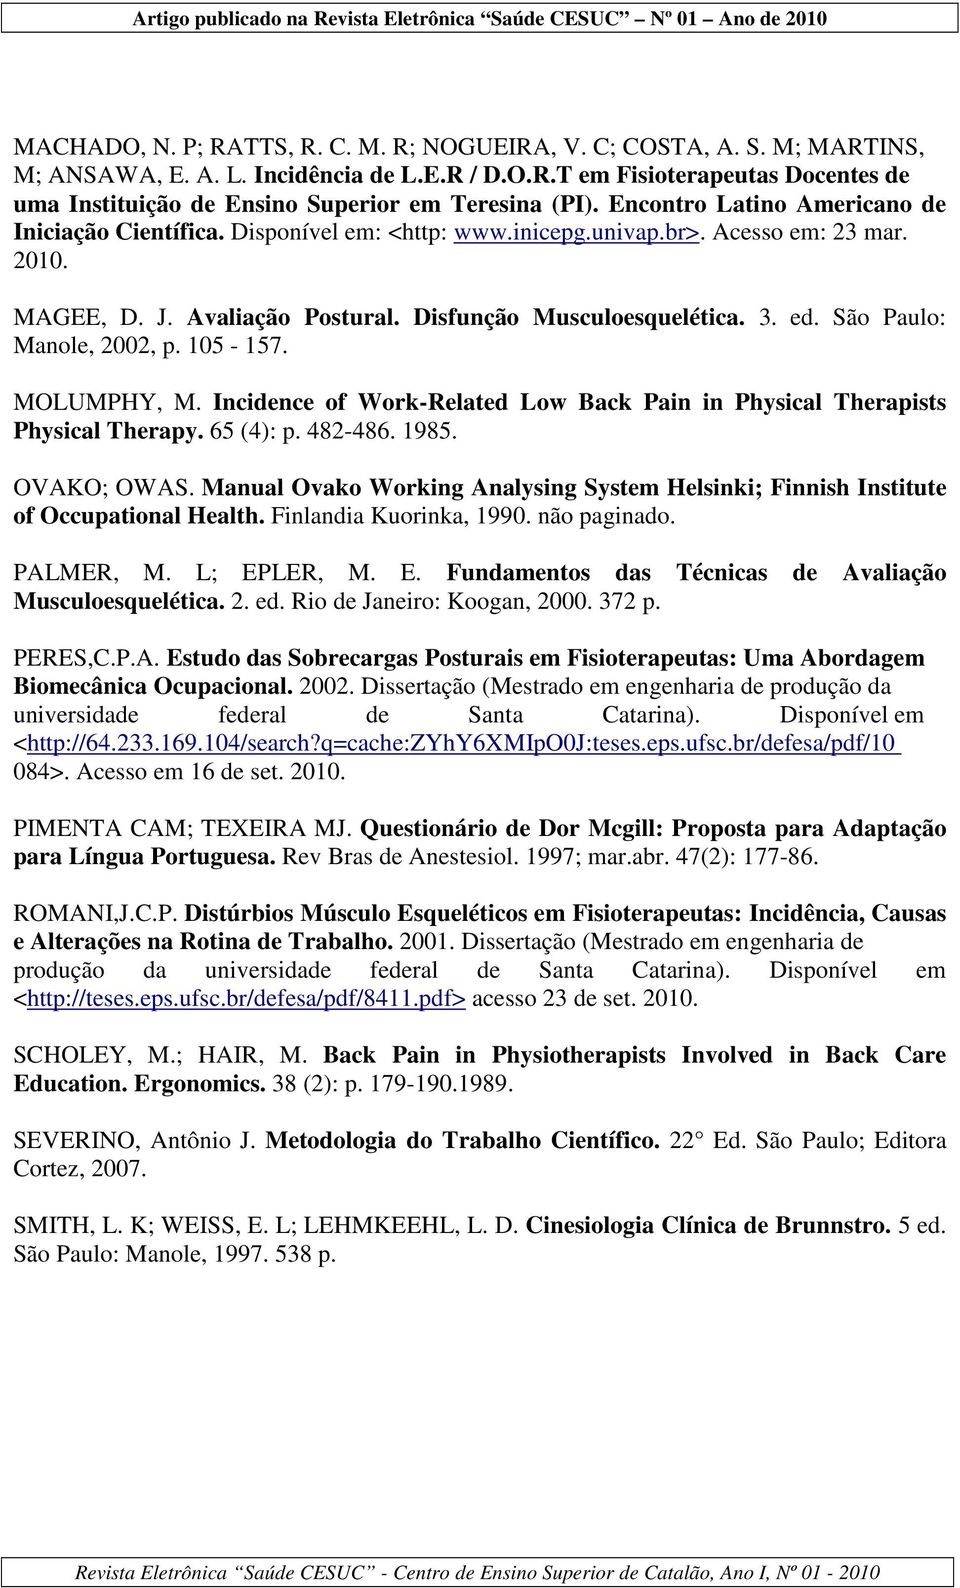 São Paulo: Manole, 2002, p. 105-157. MOLUMPHY, M. Incidence of Work-Related Low Back Pain in Physical Therapists Physical Therapy. 65 (4): p. 482-486. 1985. OVAKO; OWAS.